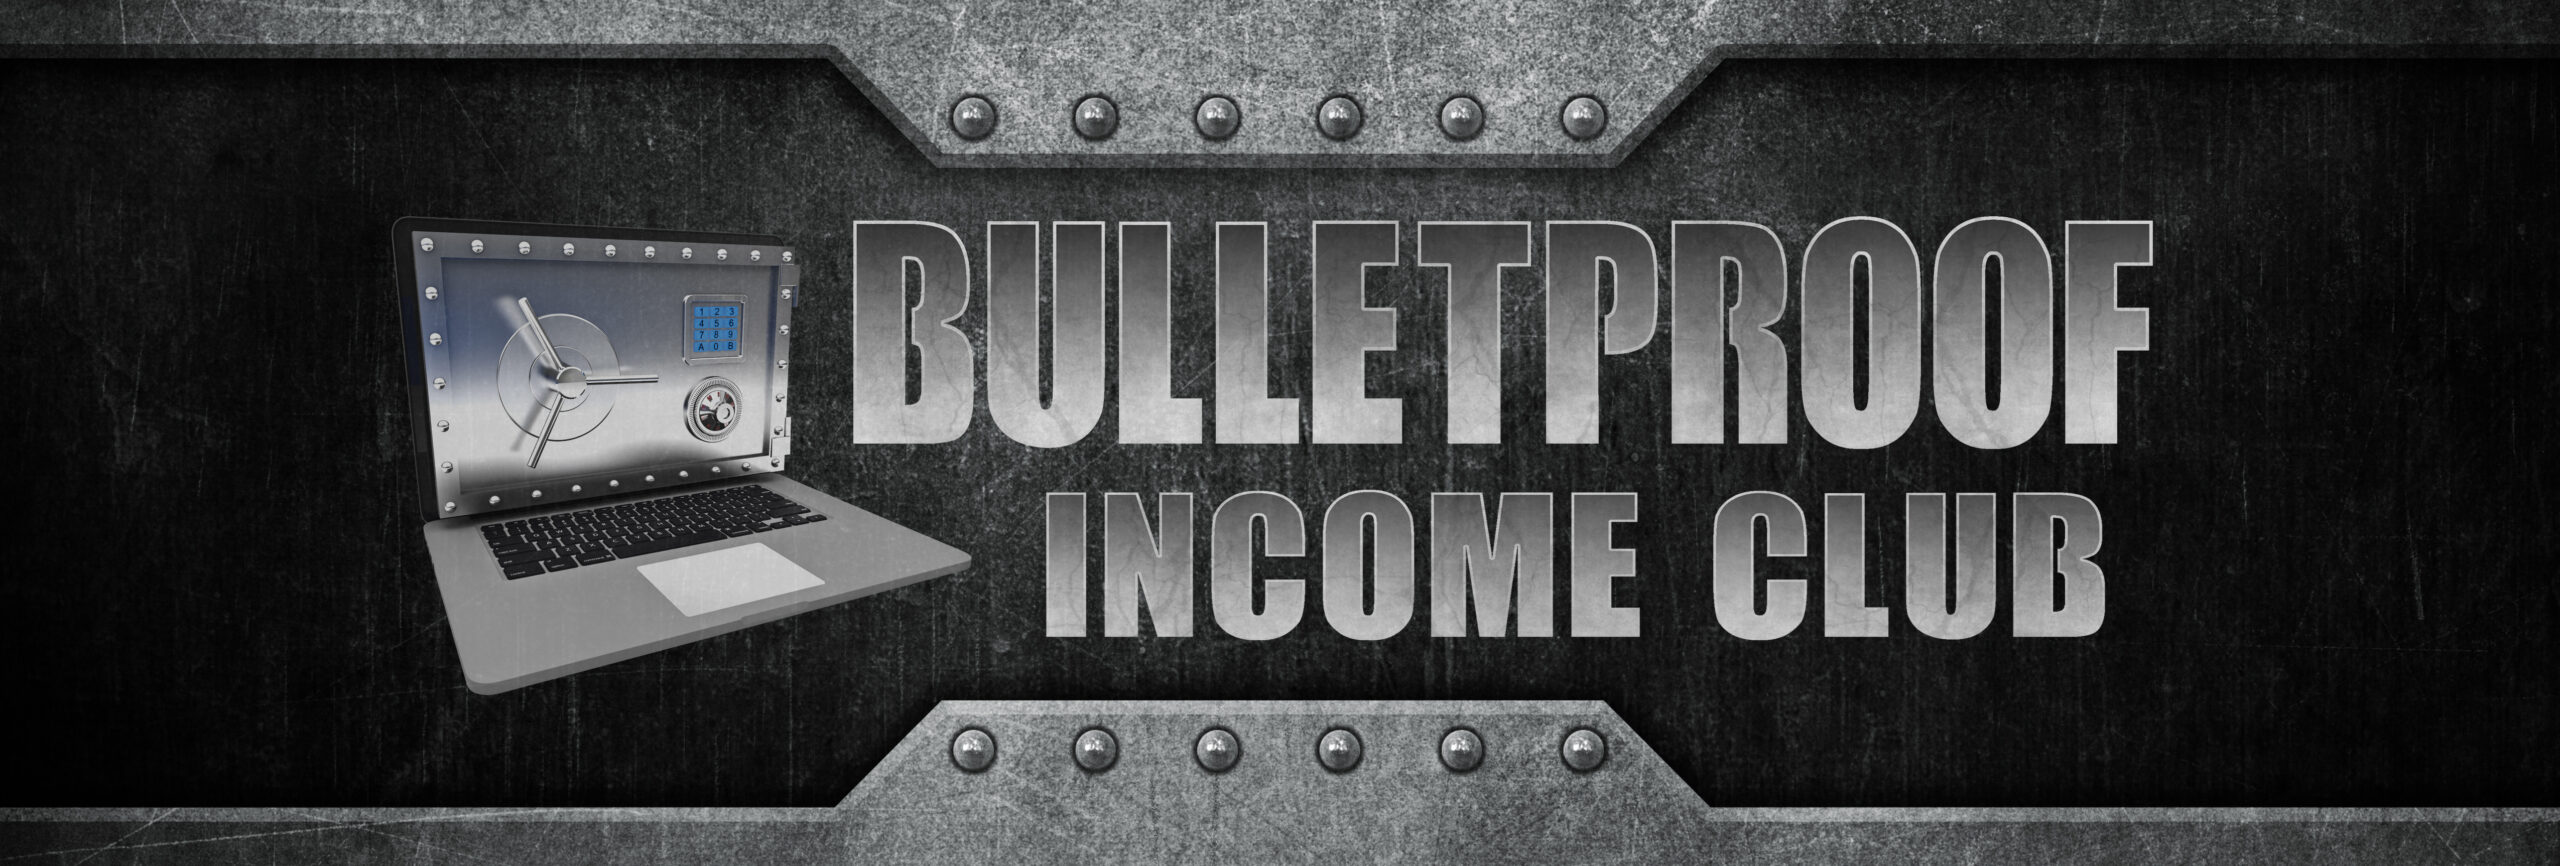 About Bulletproof Income Club